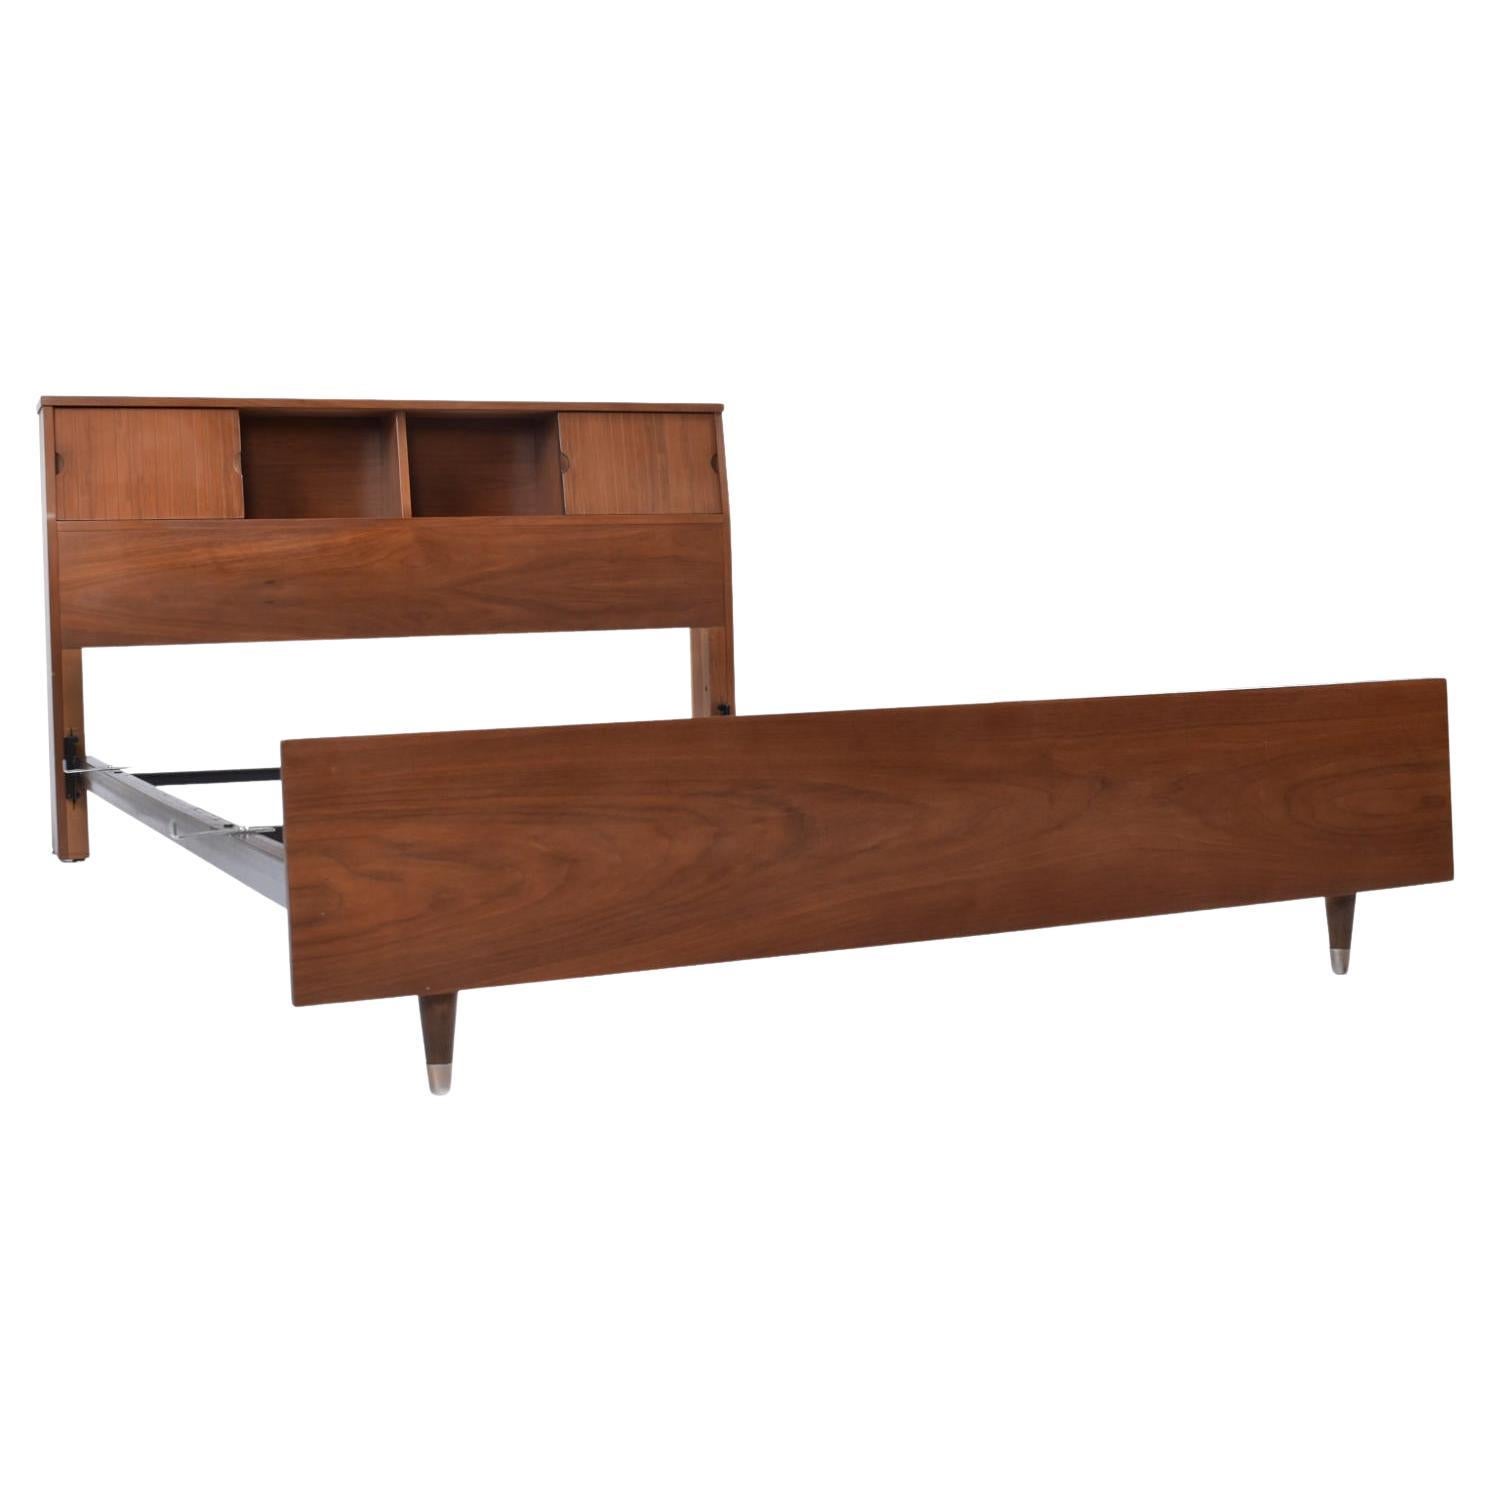 The metal frame is included!

Mid-Century Modern bookcase headboard and matching footboard by Hooker. The Hooker Mainline collection is beloved by collectors for its minimalist silhouette, fine walnut wood, and neatly tailored embellishments. This